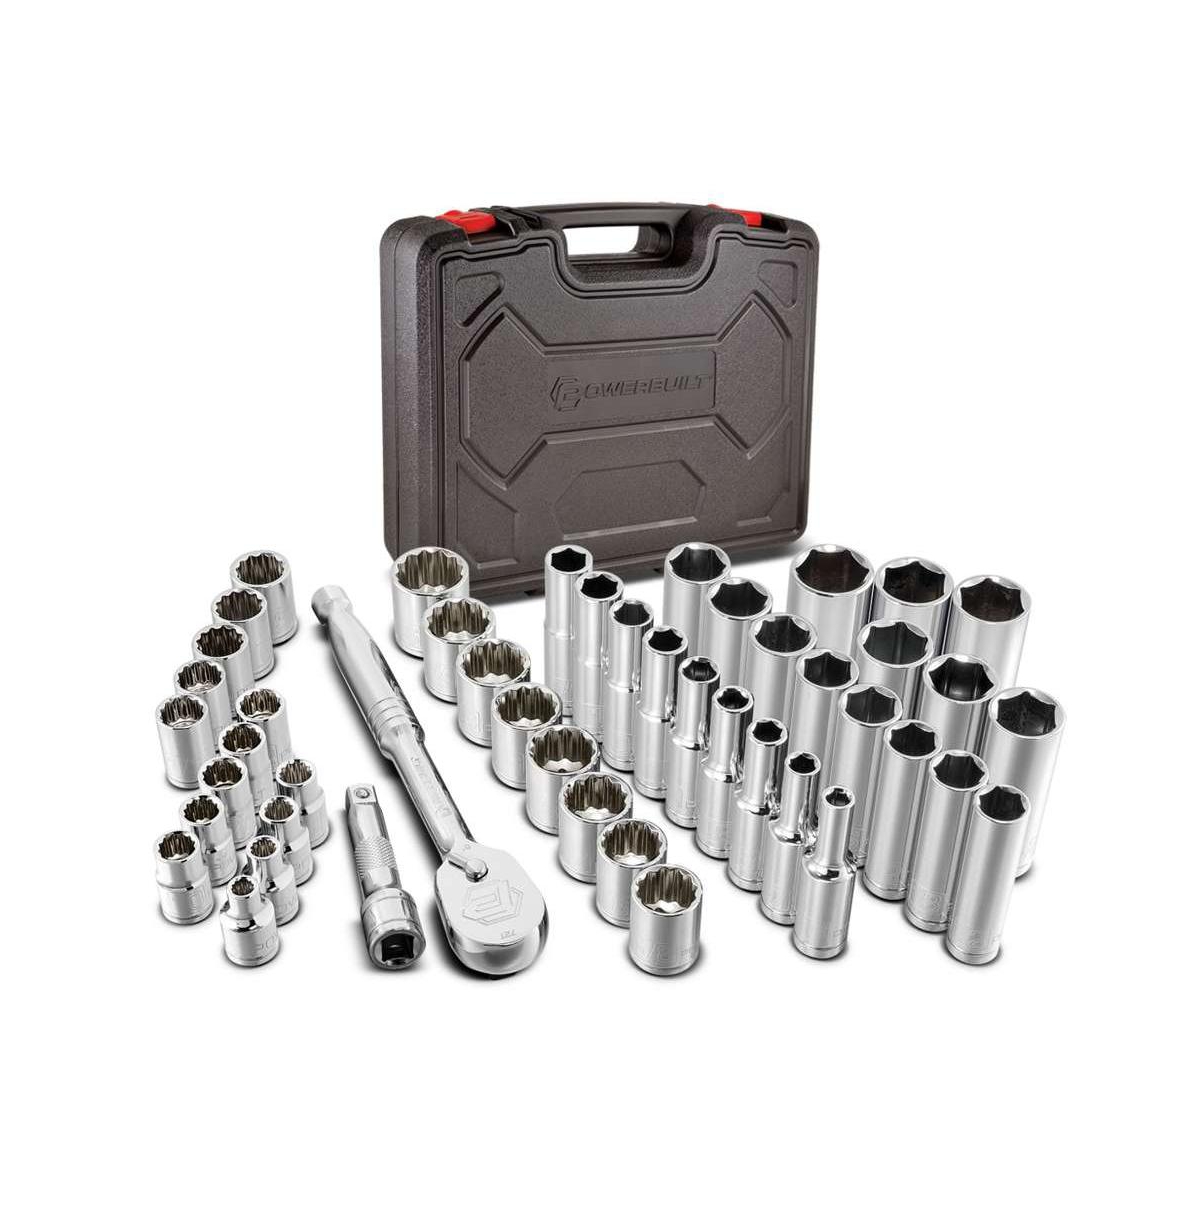 47 Piece 3/8 Inch Drive Tool Set with Sockets and Ratchet in Case - Silver